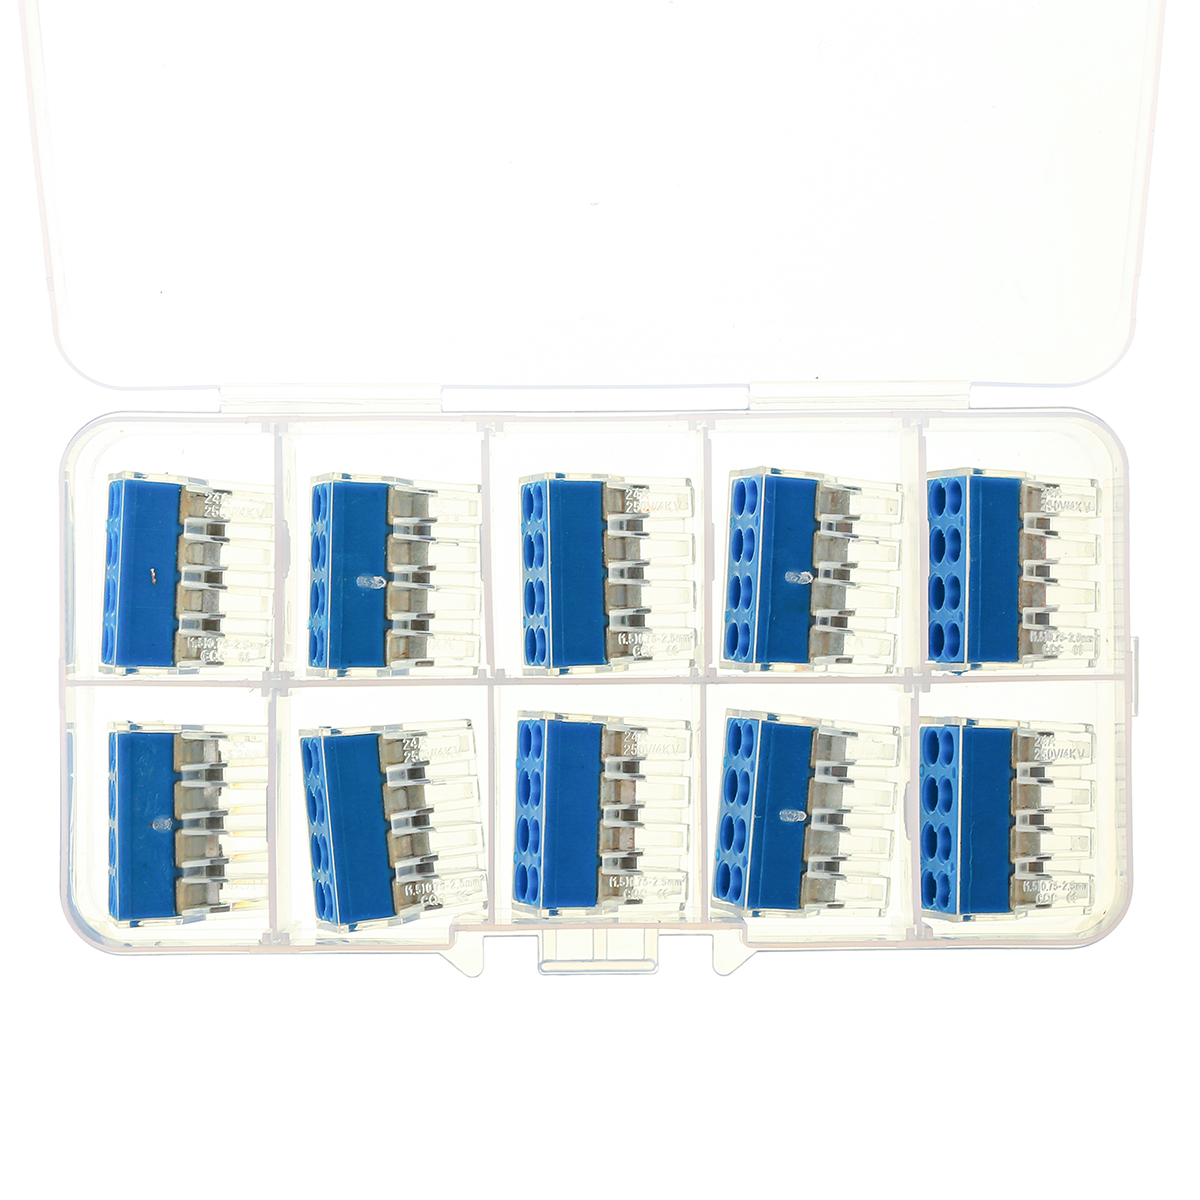 10Pcs-8-Holes-Universal-Compact-Terminal-Block-Electric-Cable-Wire-Connector-1384417-2